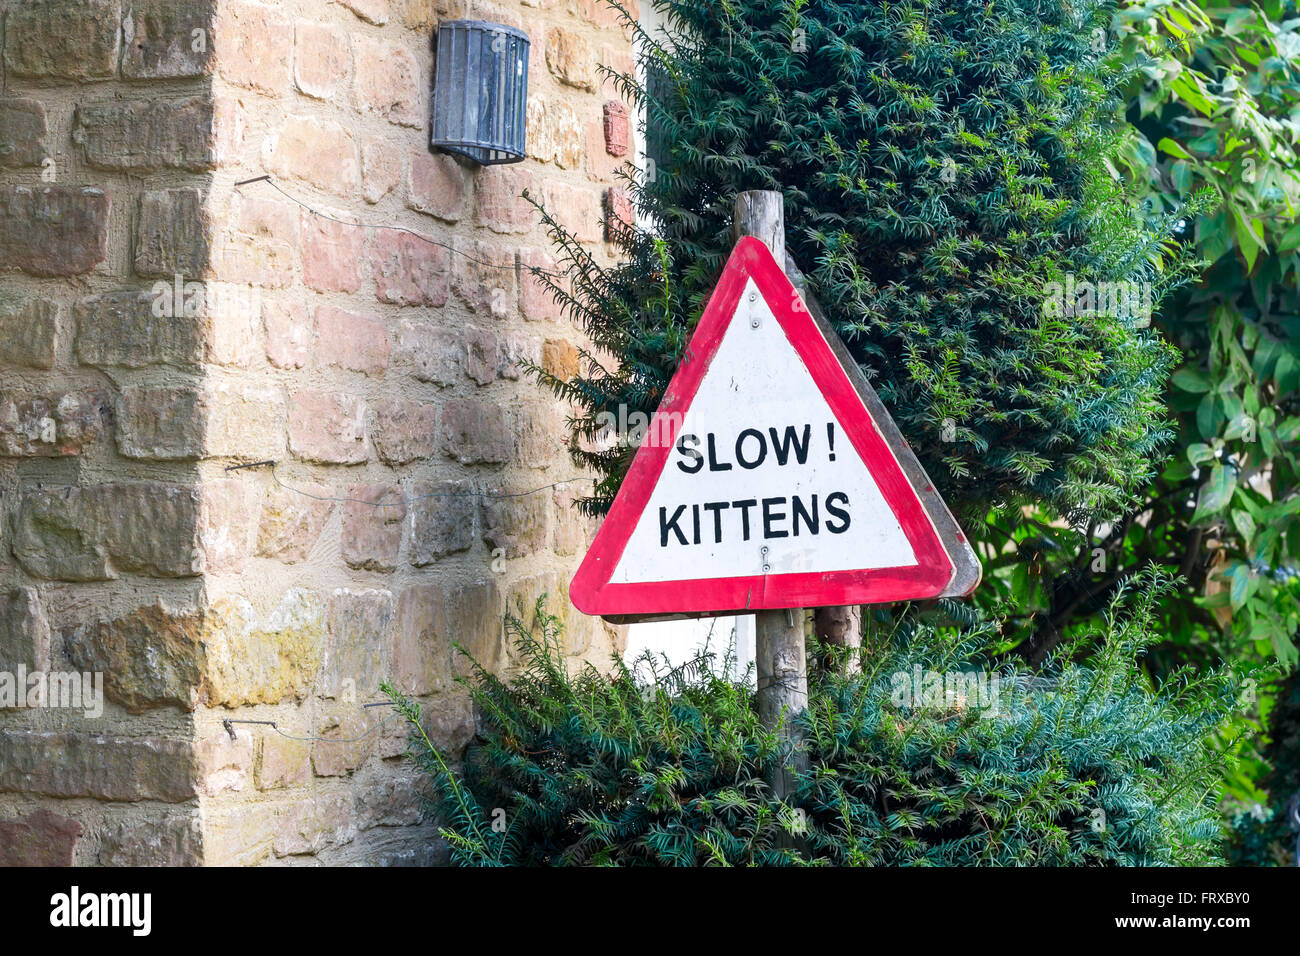 Cotswolds, United Kingdom - September 07, 2013: Cute and funny handmade 'Slow Kittens' road sign Stock Photo